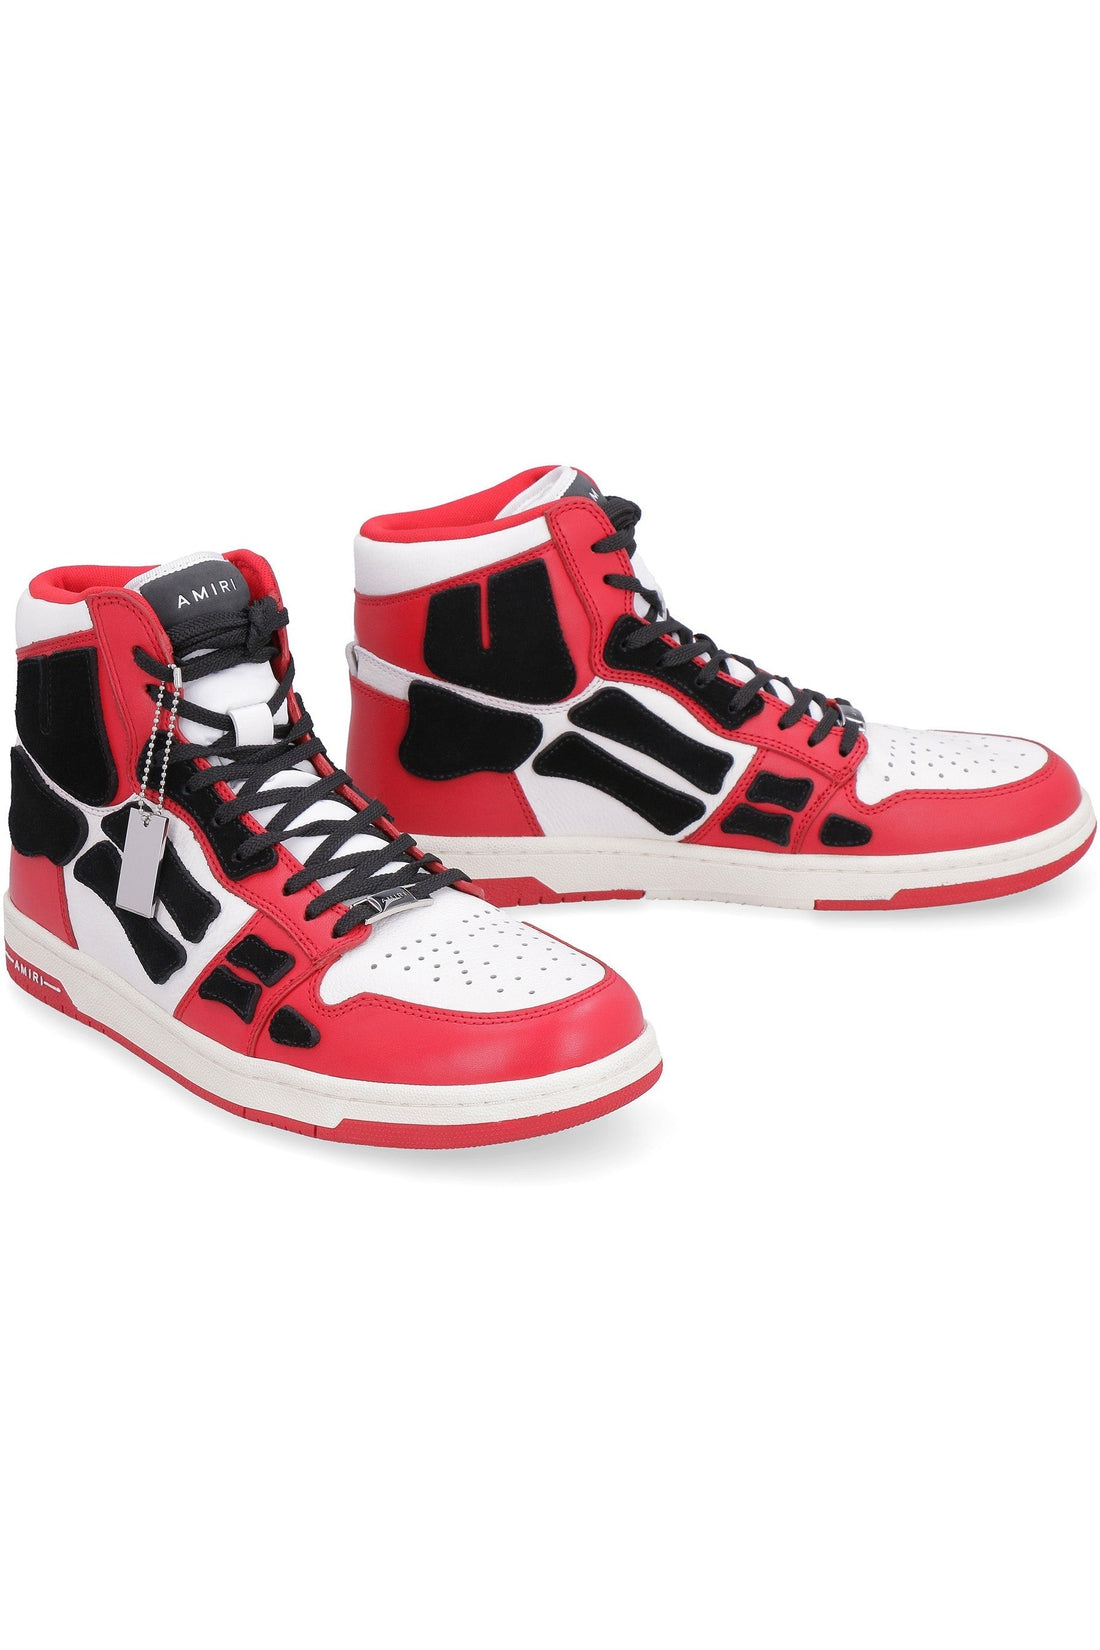 AMIRI-OUTLET-SALE-Skel leather high-top sneakers-ARCHIVIST